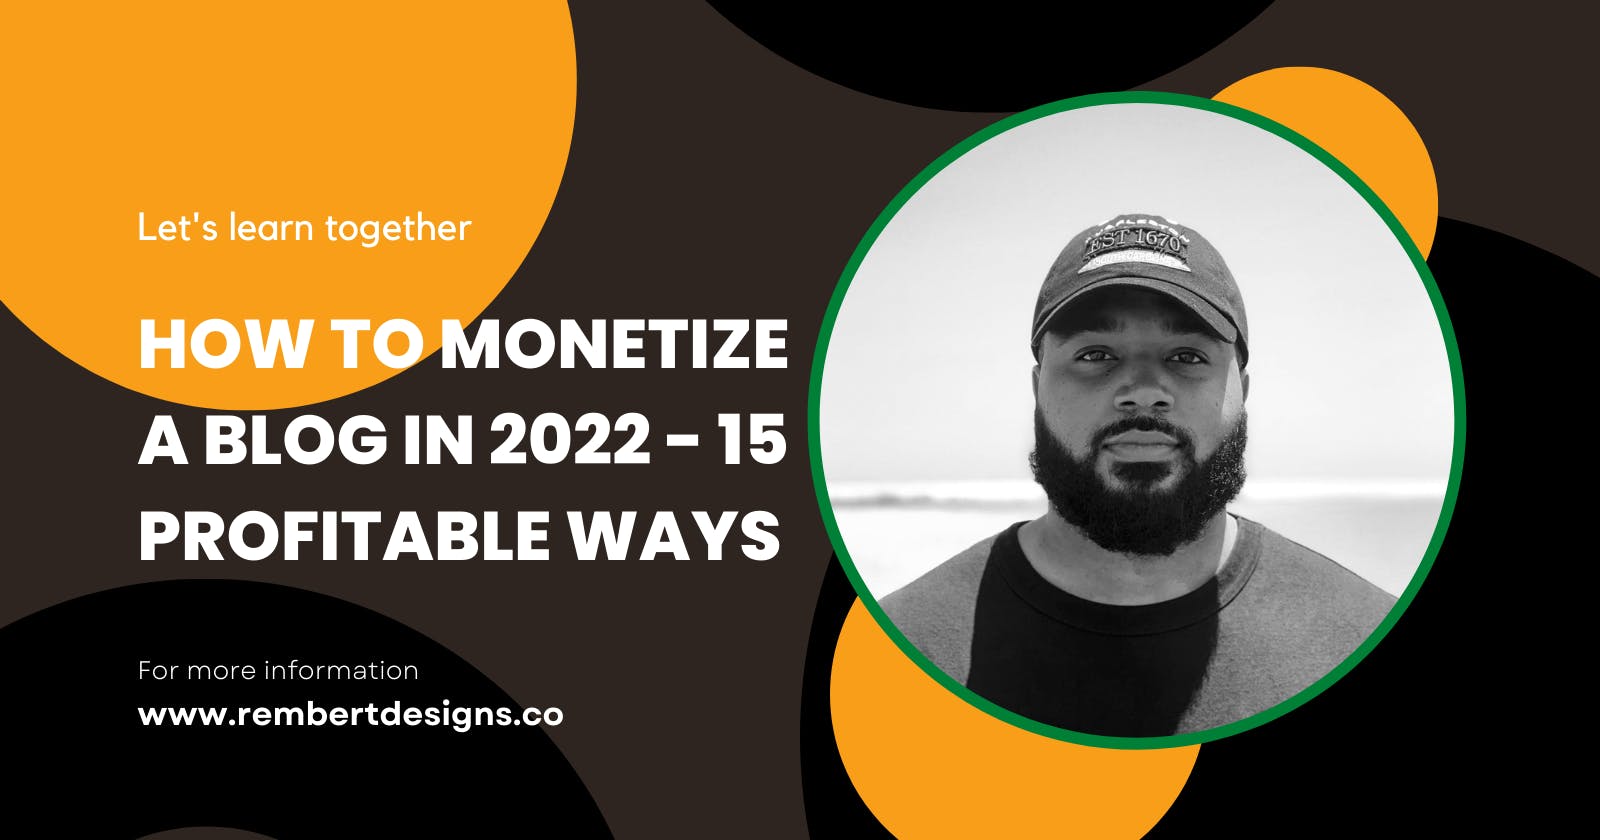 How to Monetize a Blog in 2022 - 15 Profitable Ways